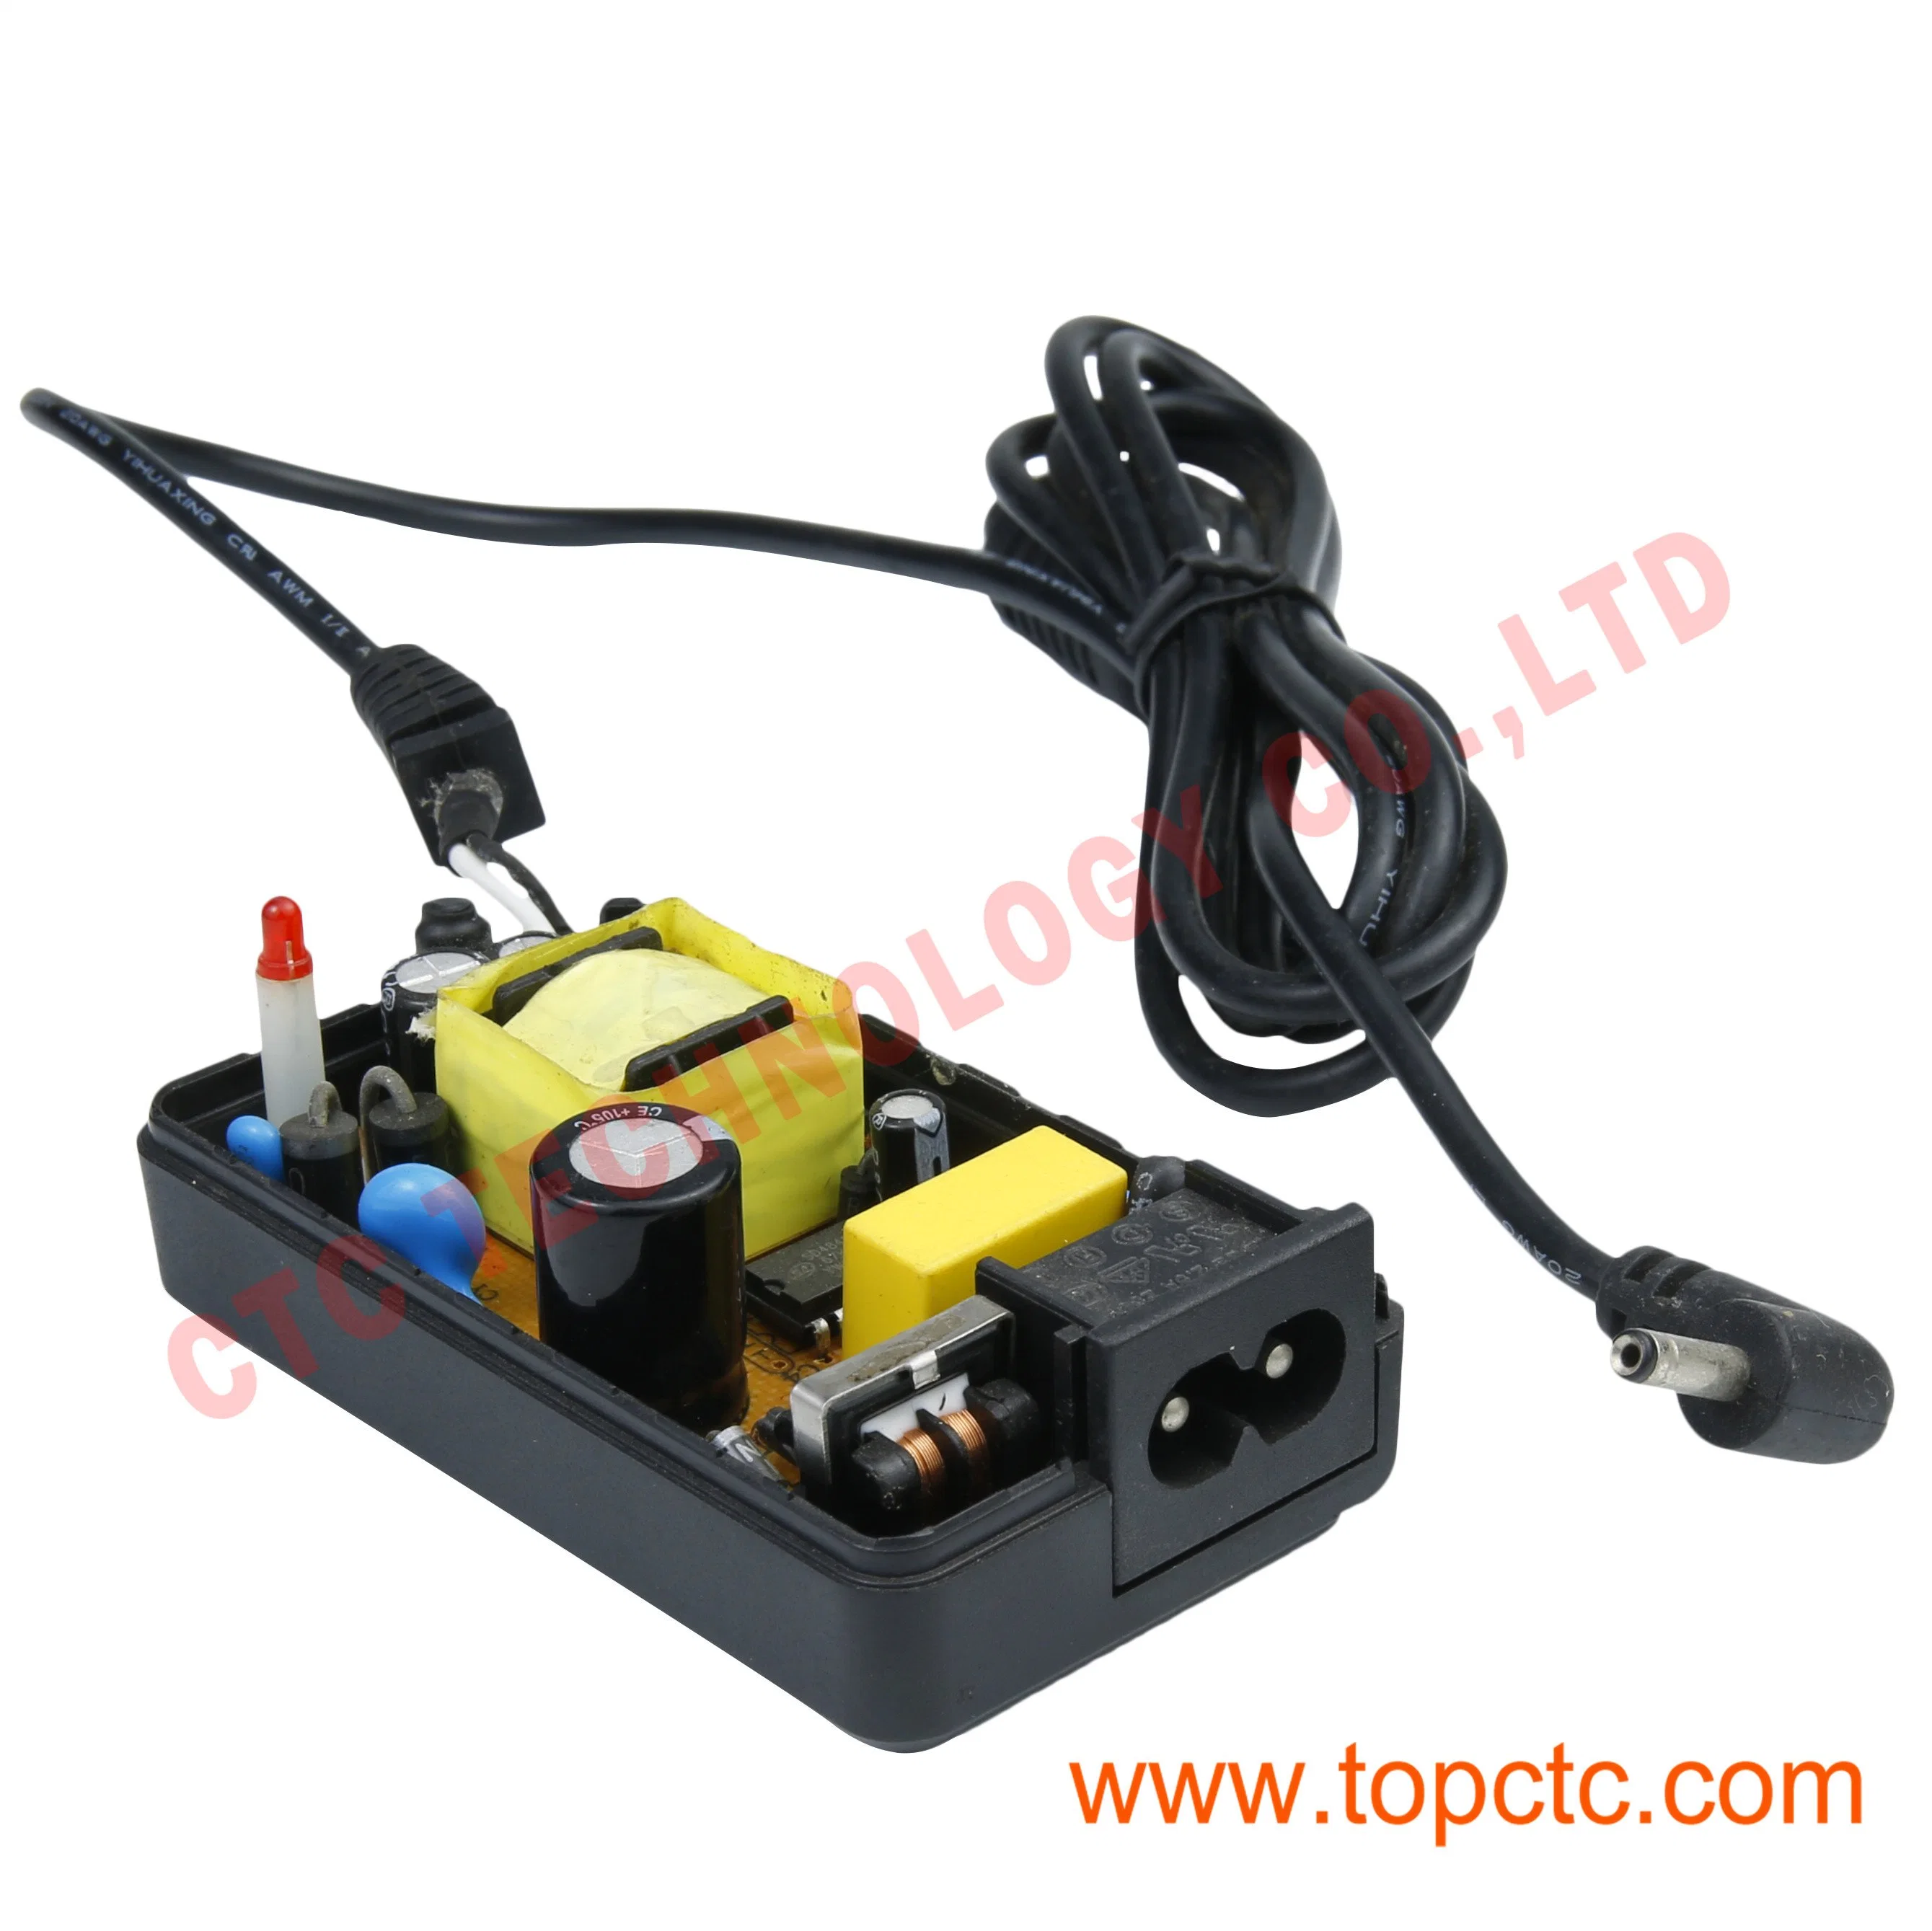 Adaper Charger Consumer ELectronic Circuit Board PCBA